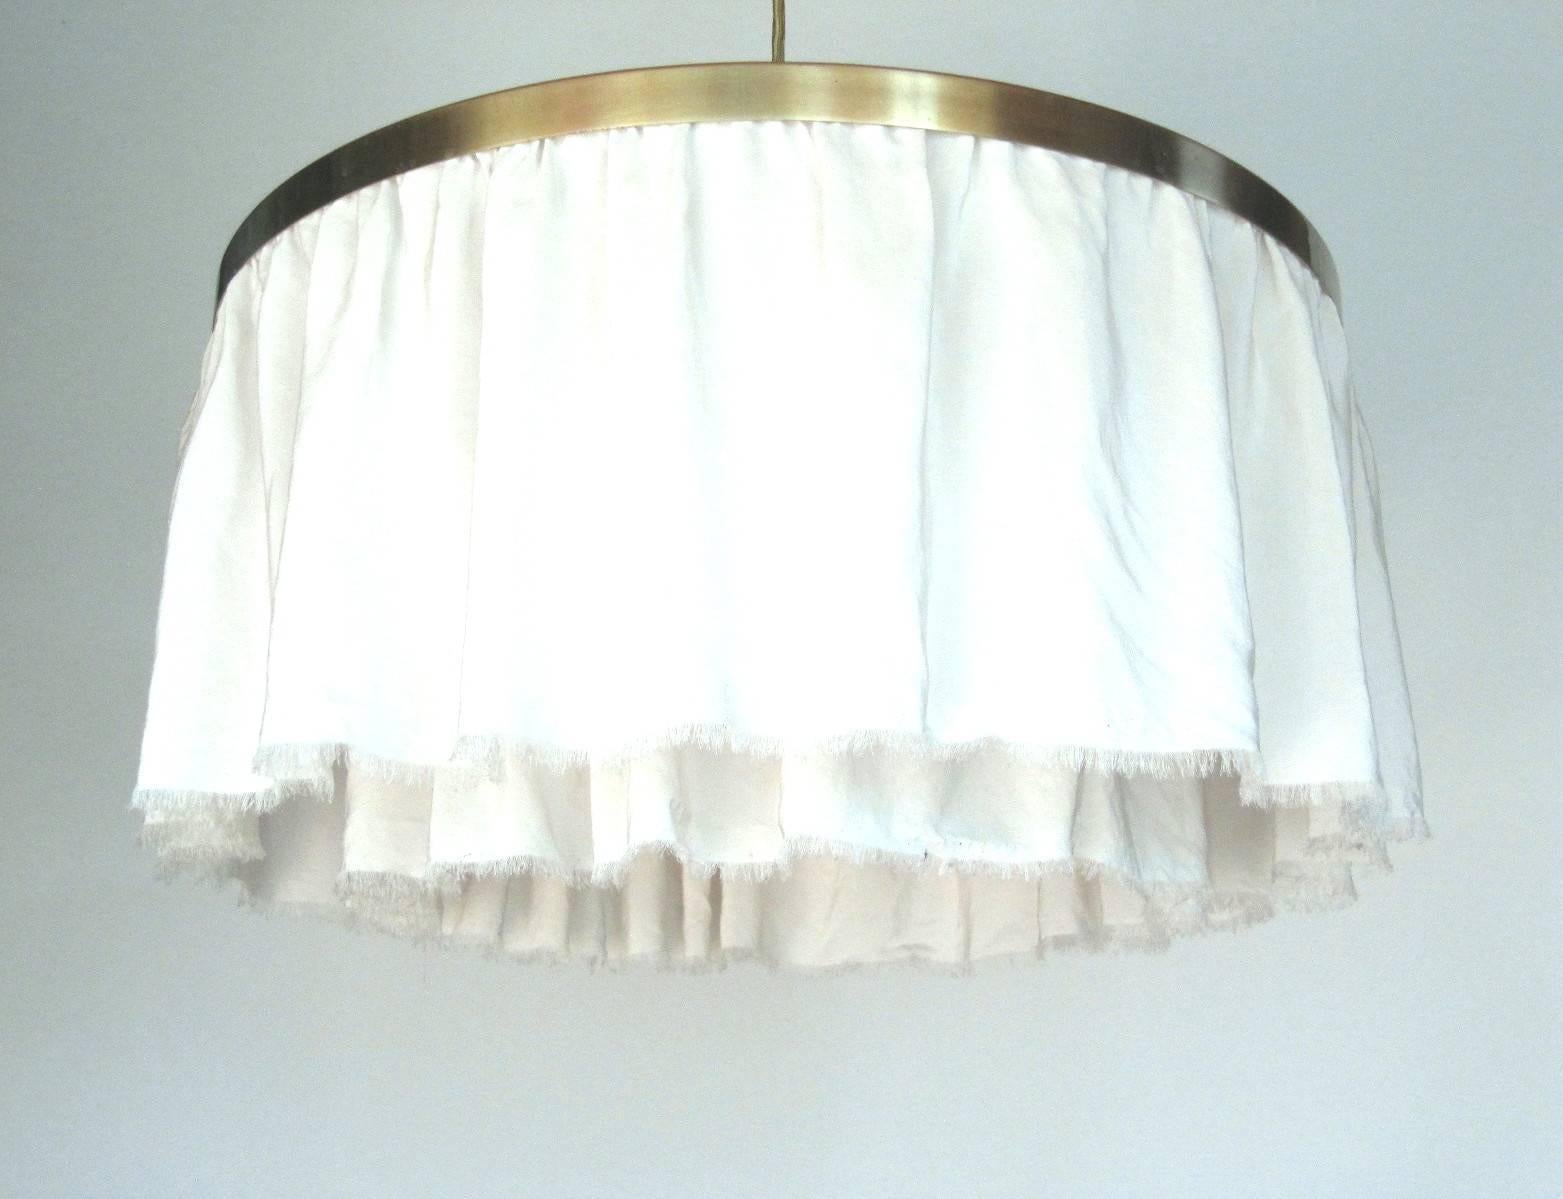 Designed by Adolf Loos and produced in Austria during the 1960s. Made from brushed brass and pleated silk with a plucked hem, features three bulbs. The height of the lamp is adjusted with a bullet train from 80 cm to 140 cm. This model was used by